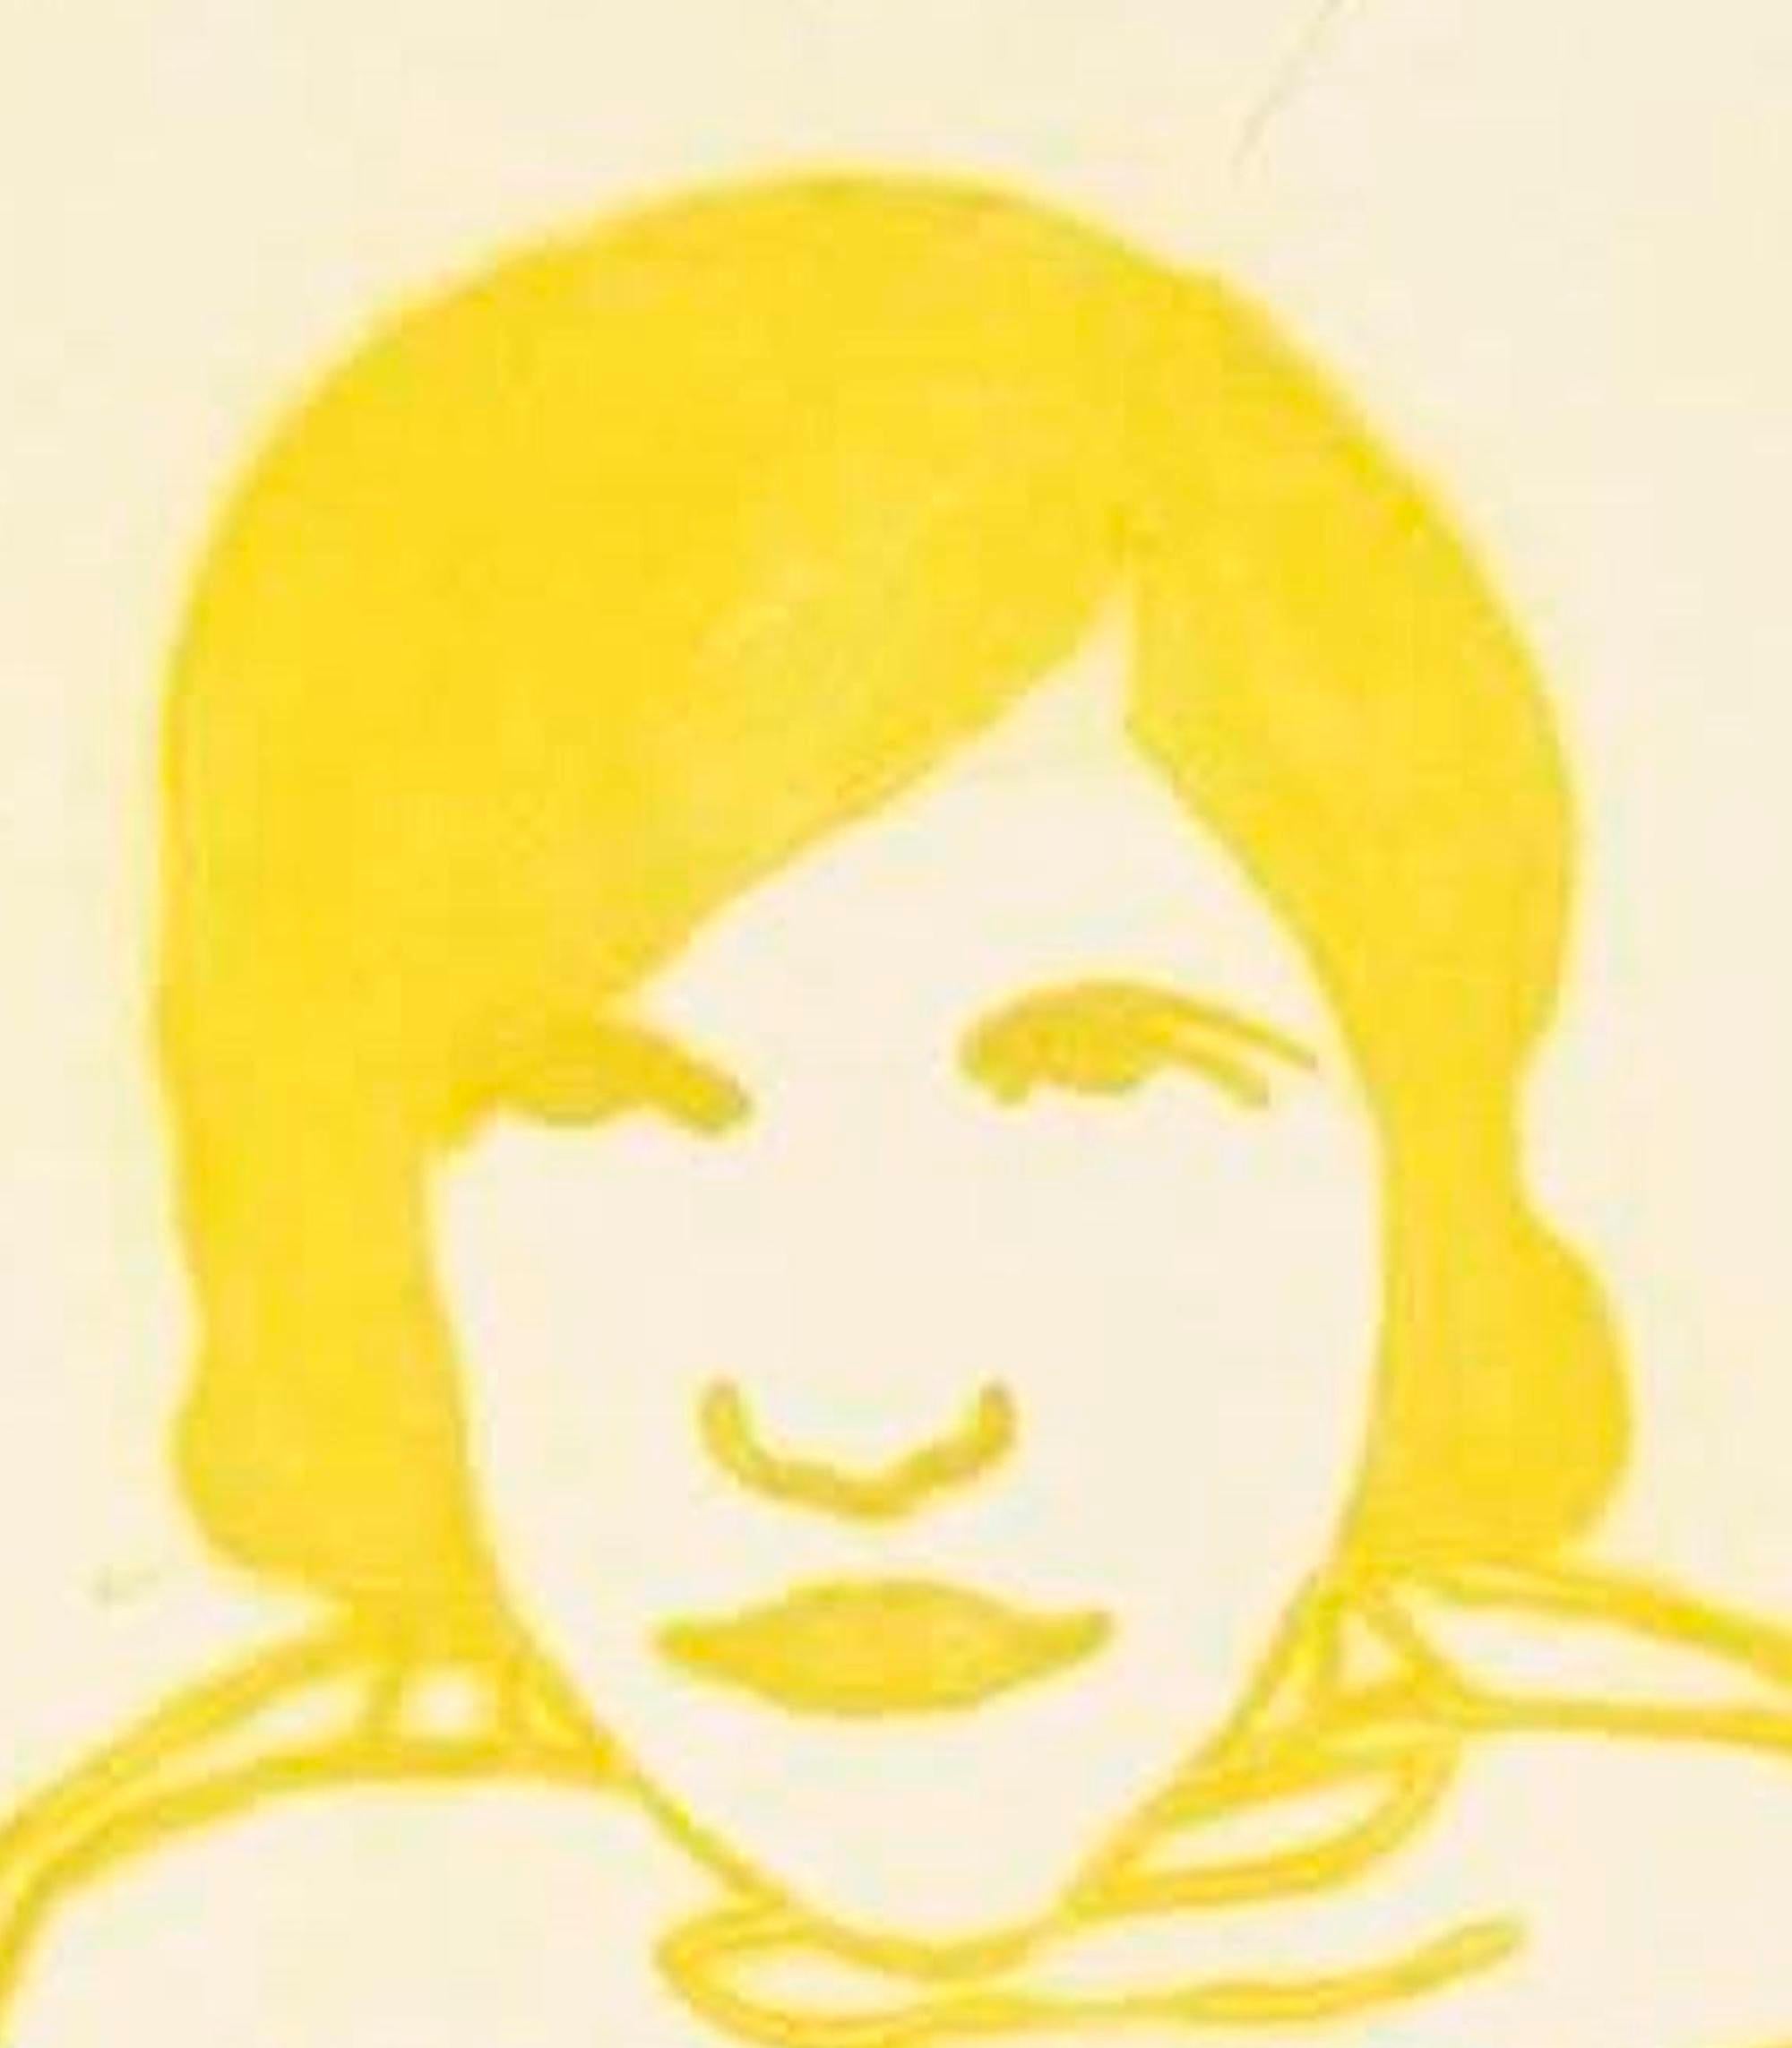 'Jean Rhys' is a limited edition drypoint etching by Kate Boxer. This print features the novelist Jean Rhys in a bright yellow colour. Kate Boxer manages to capture the essence of Jean Rhys. Kate uses only part of the sheet to capture Jean Rhys in